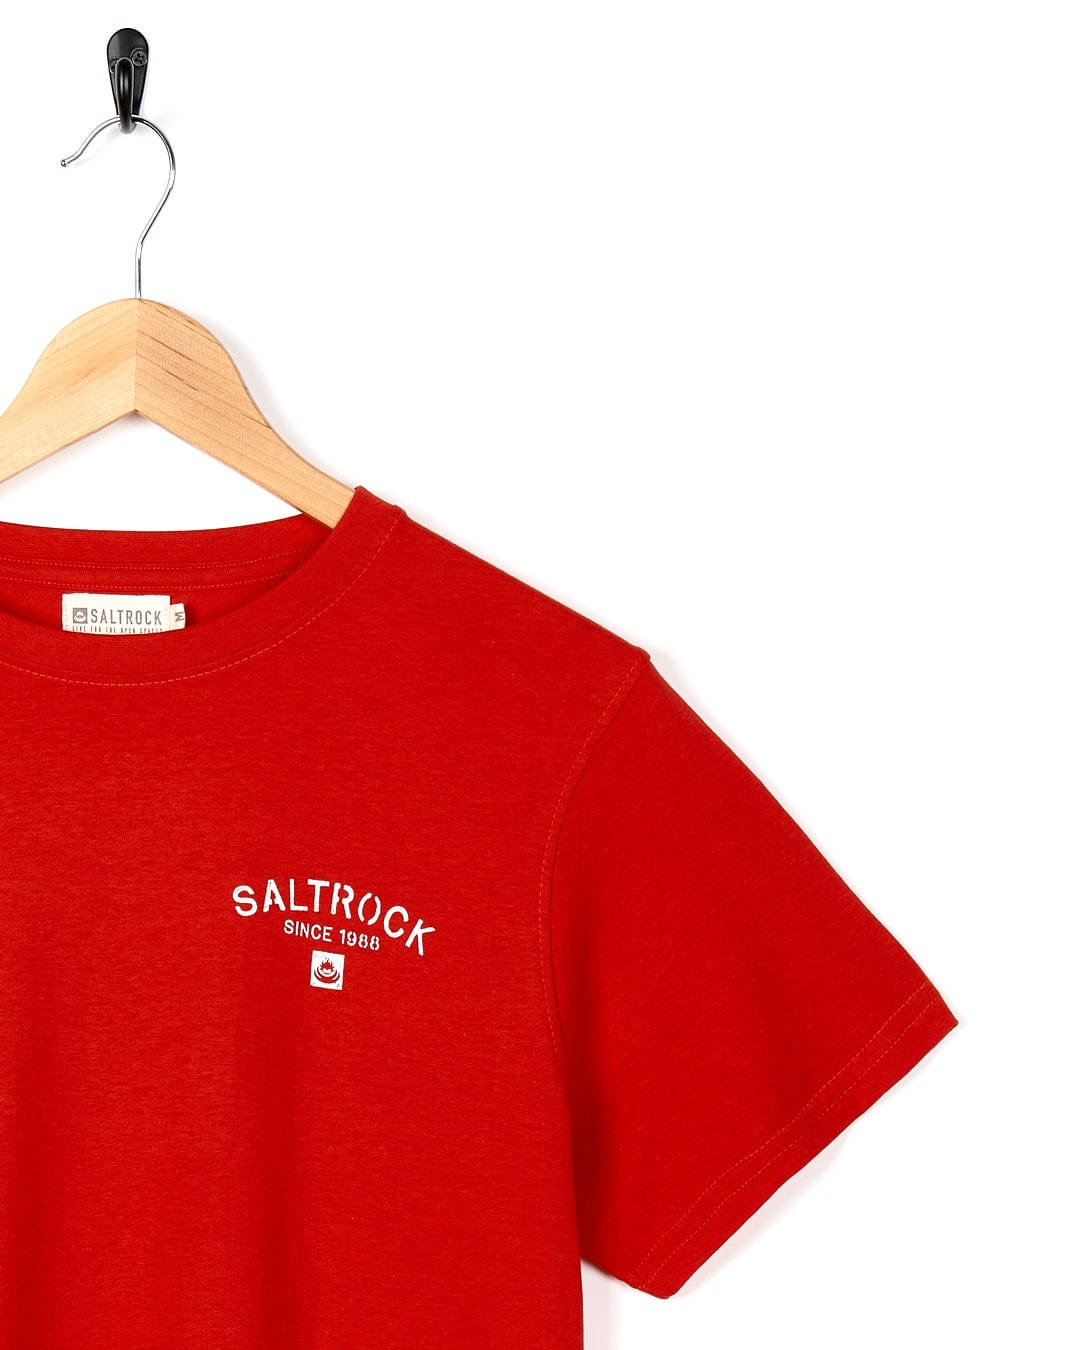 A Stencil - Mens Location T-Shirt - Tenby - Red with the brand name Saltrock on it.